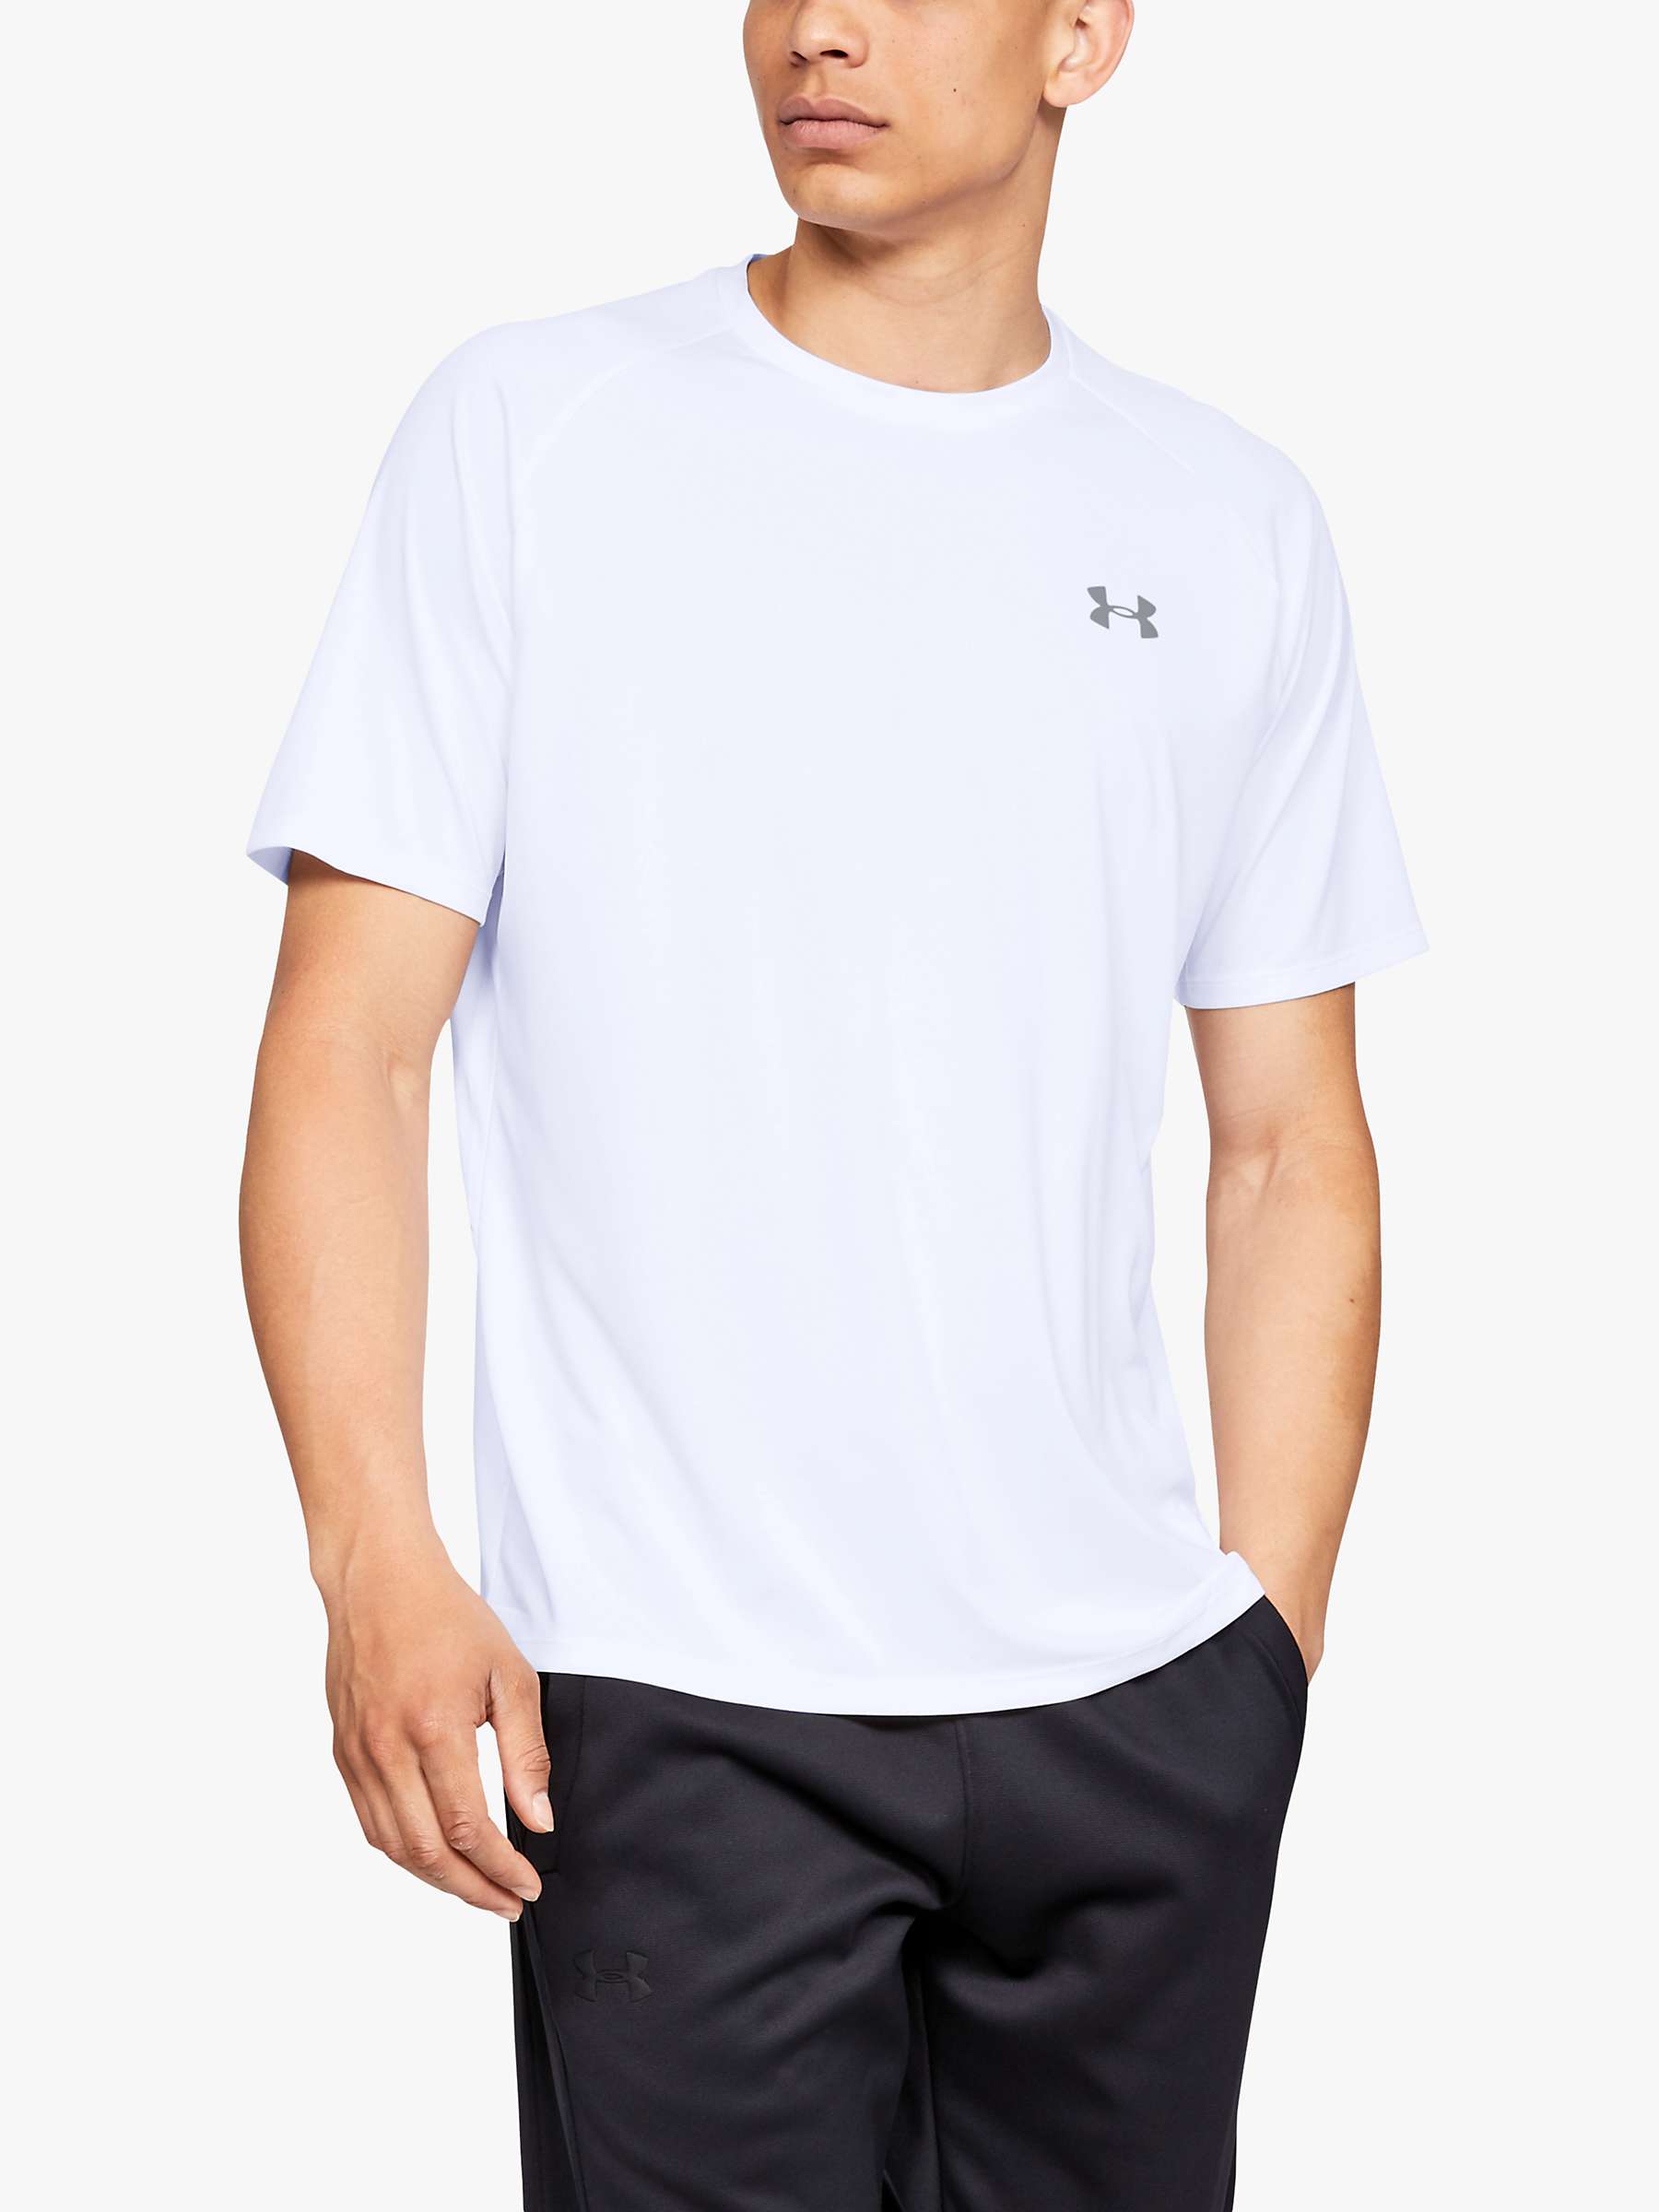 Under Armour Tech 2.0 Short Sleeve Gym Top, White at John Lewis & Partners